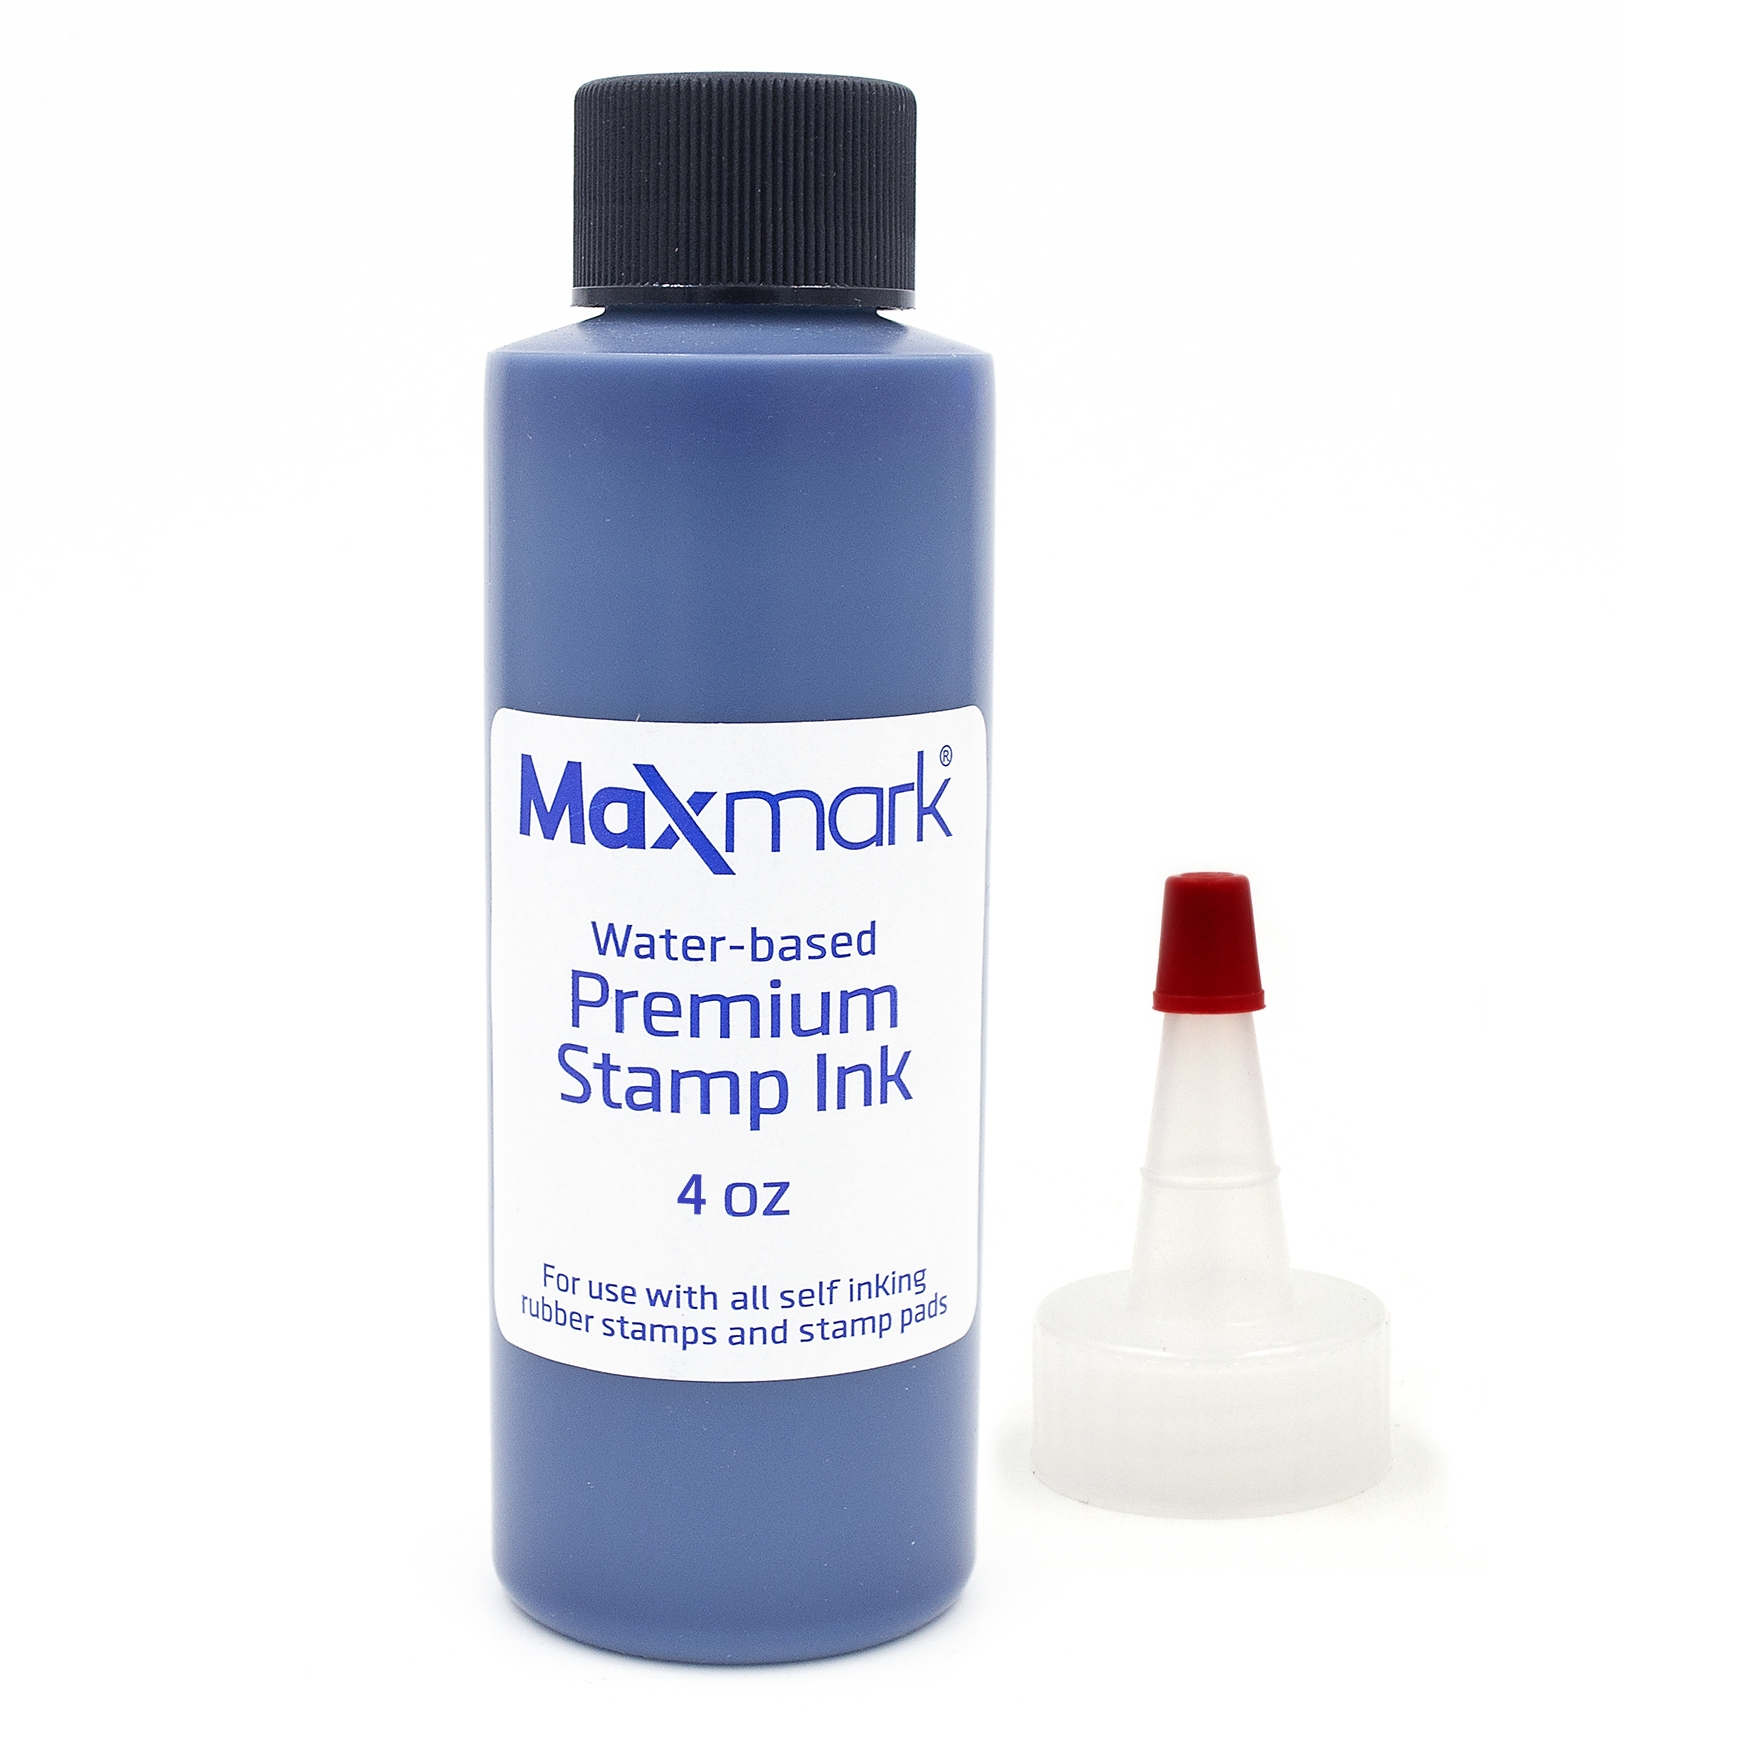 Premium Refill Ink for self Inking Stamps and Stamp Pads, Blue Color - 4 oz.